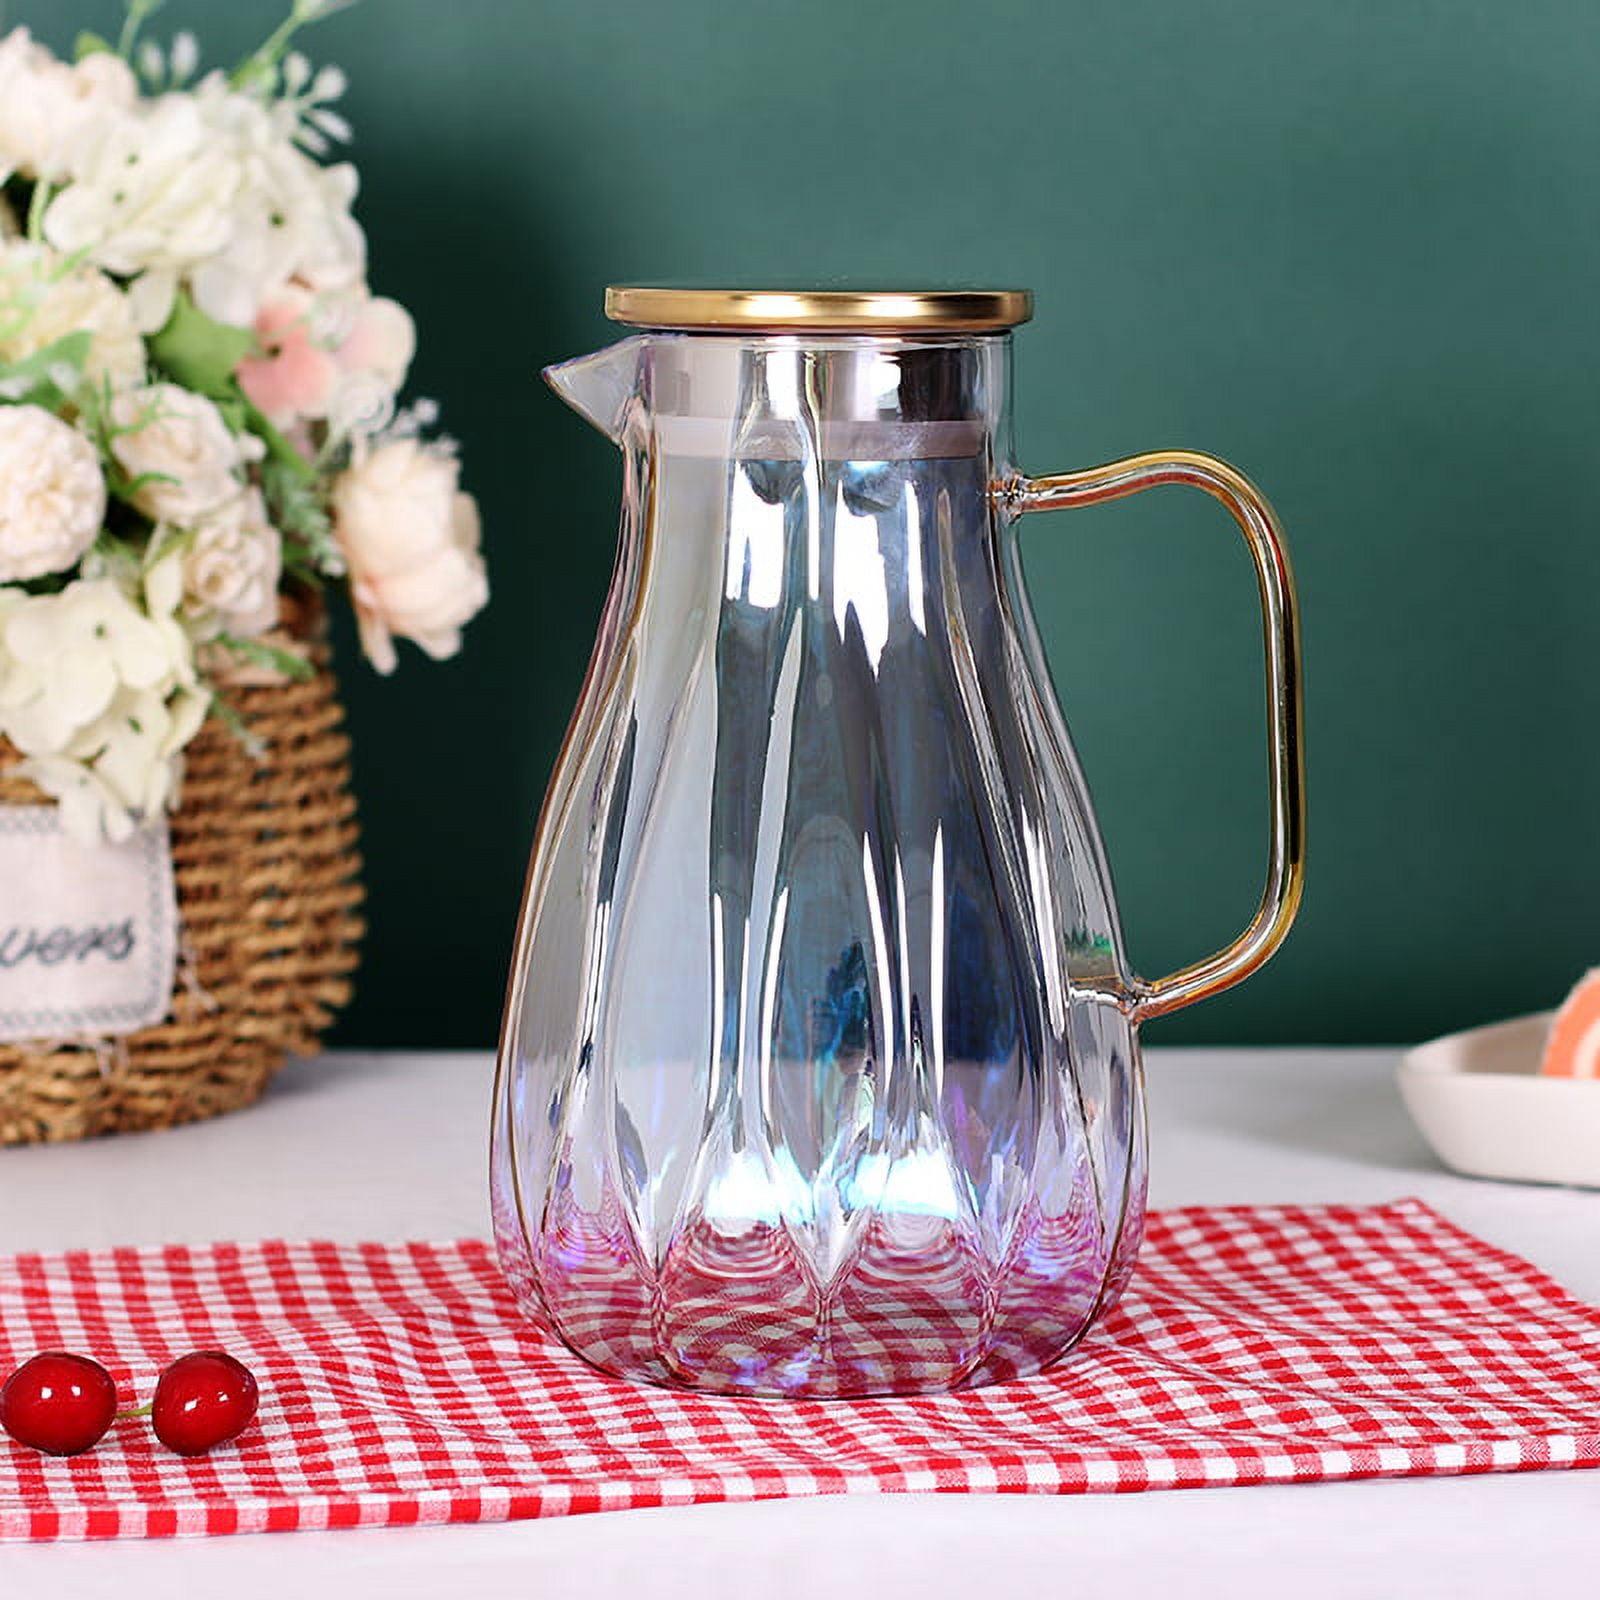 Glass Pitcher, veecom 80oz Glass Pitcher with Lid and Spout, Large Glass  Water Pitcher for Juice, Lemonade and Hot&Cold Beverage, Iced Tea Pitcher  for